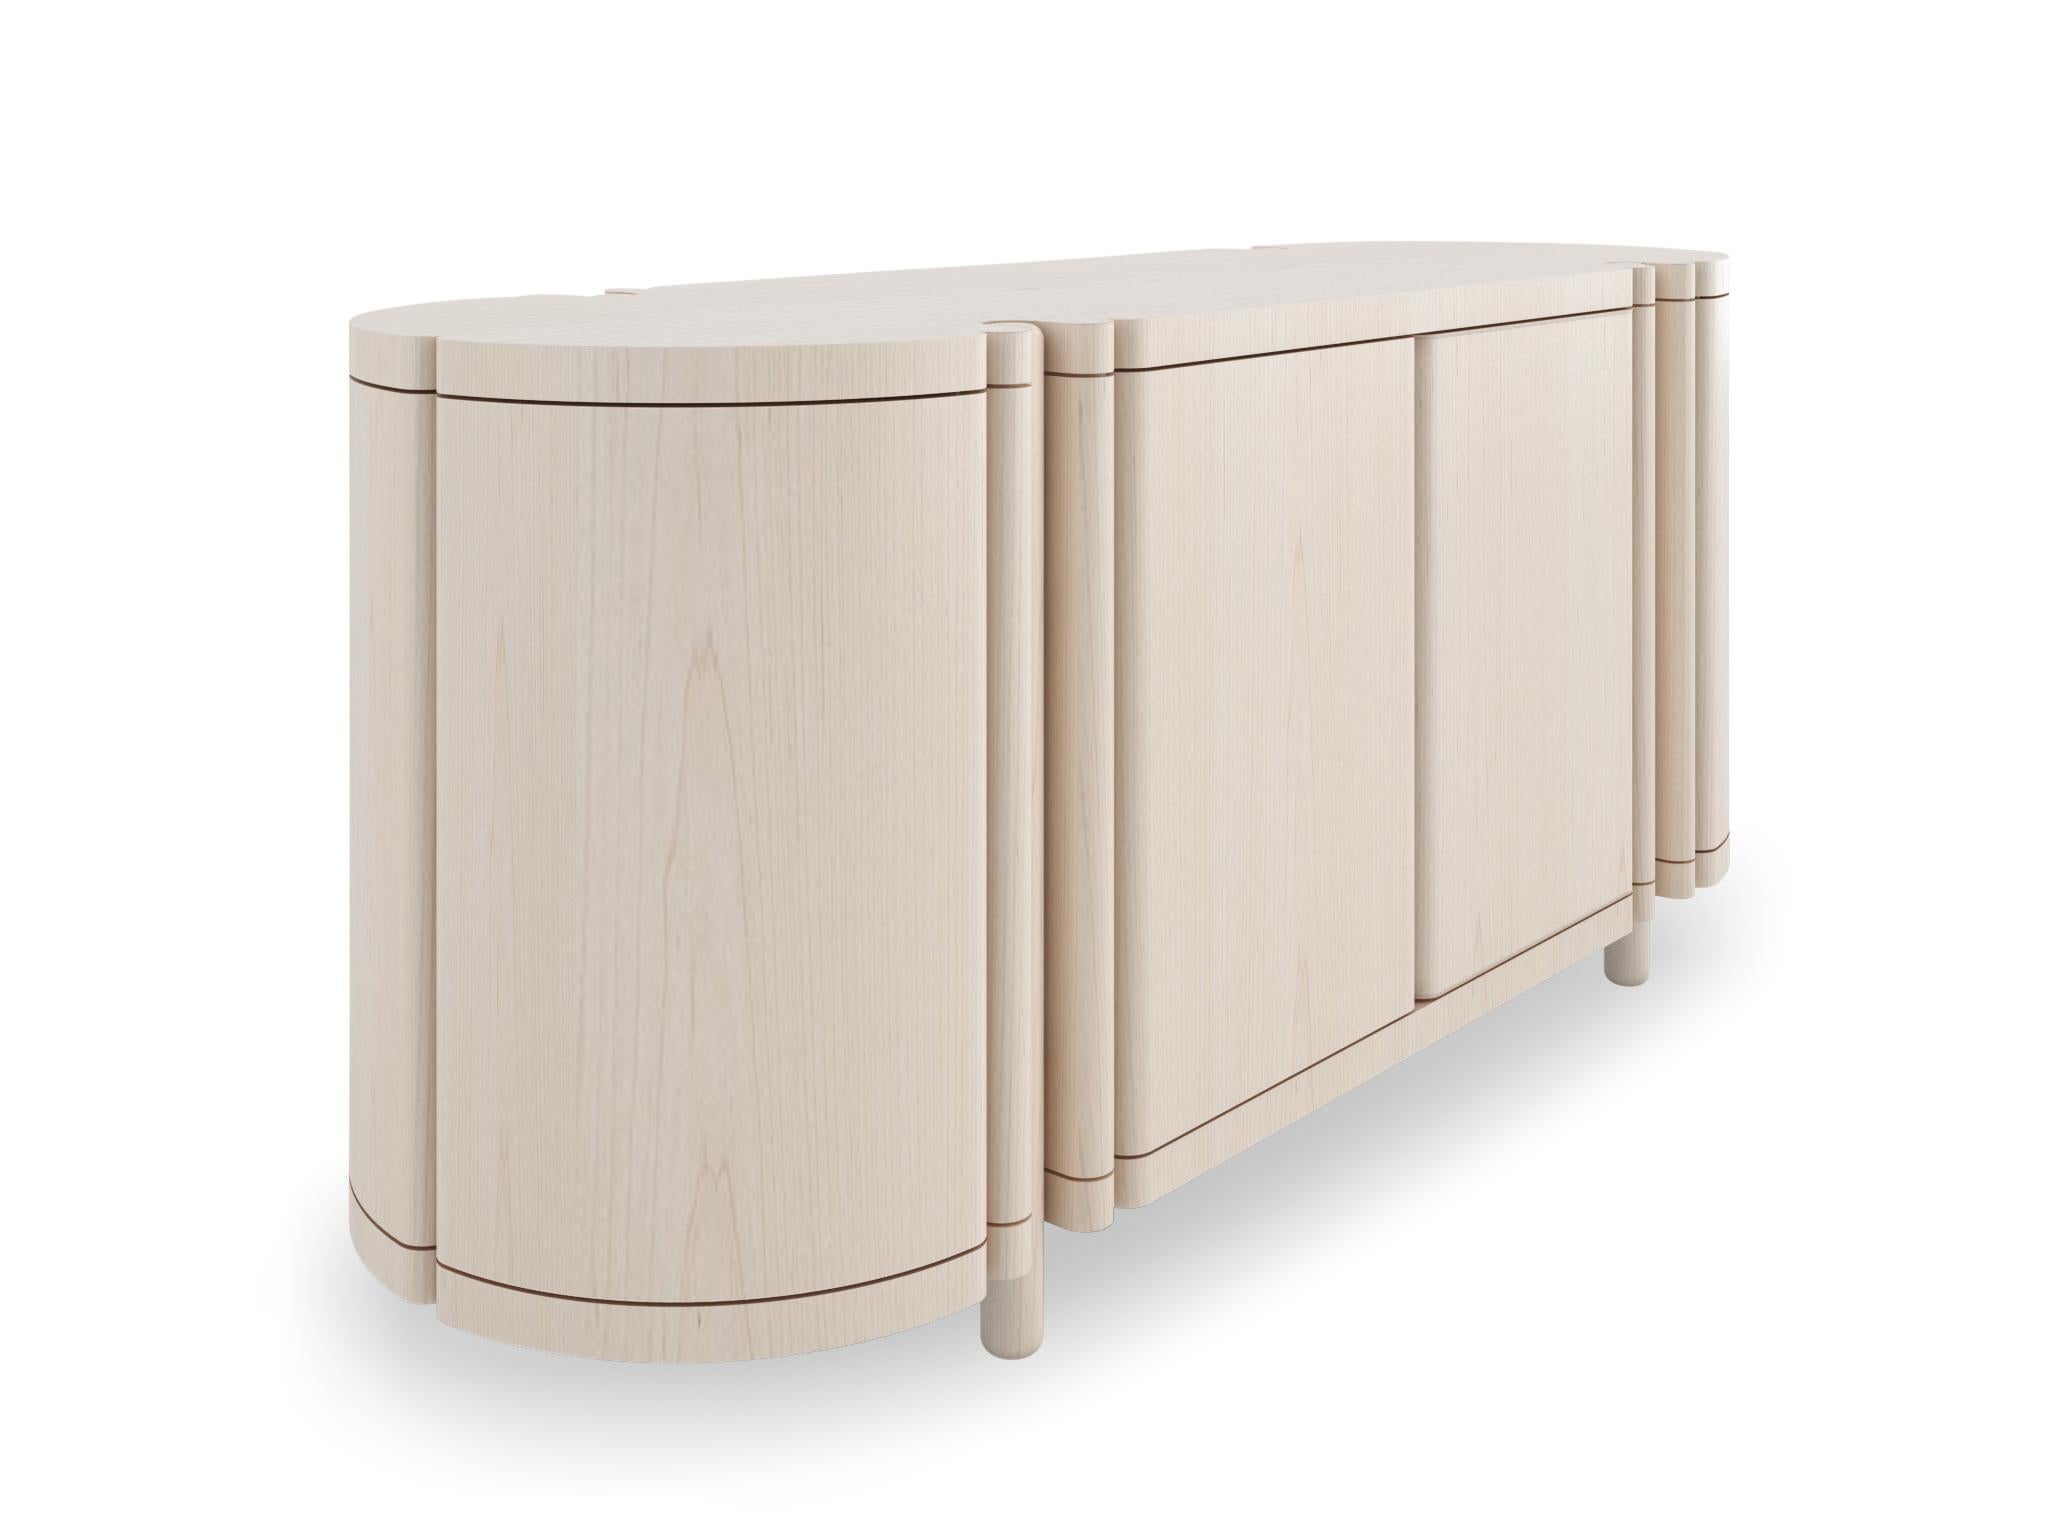 American Column Console by Black Table Studio, Maple, Represented by Tuleste Factory